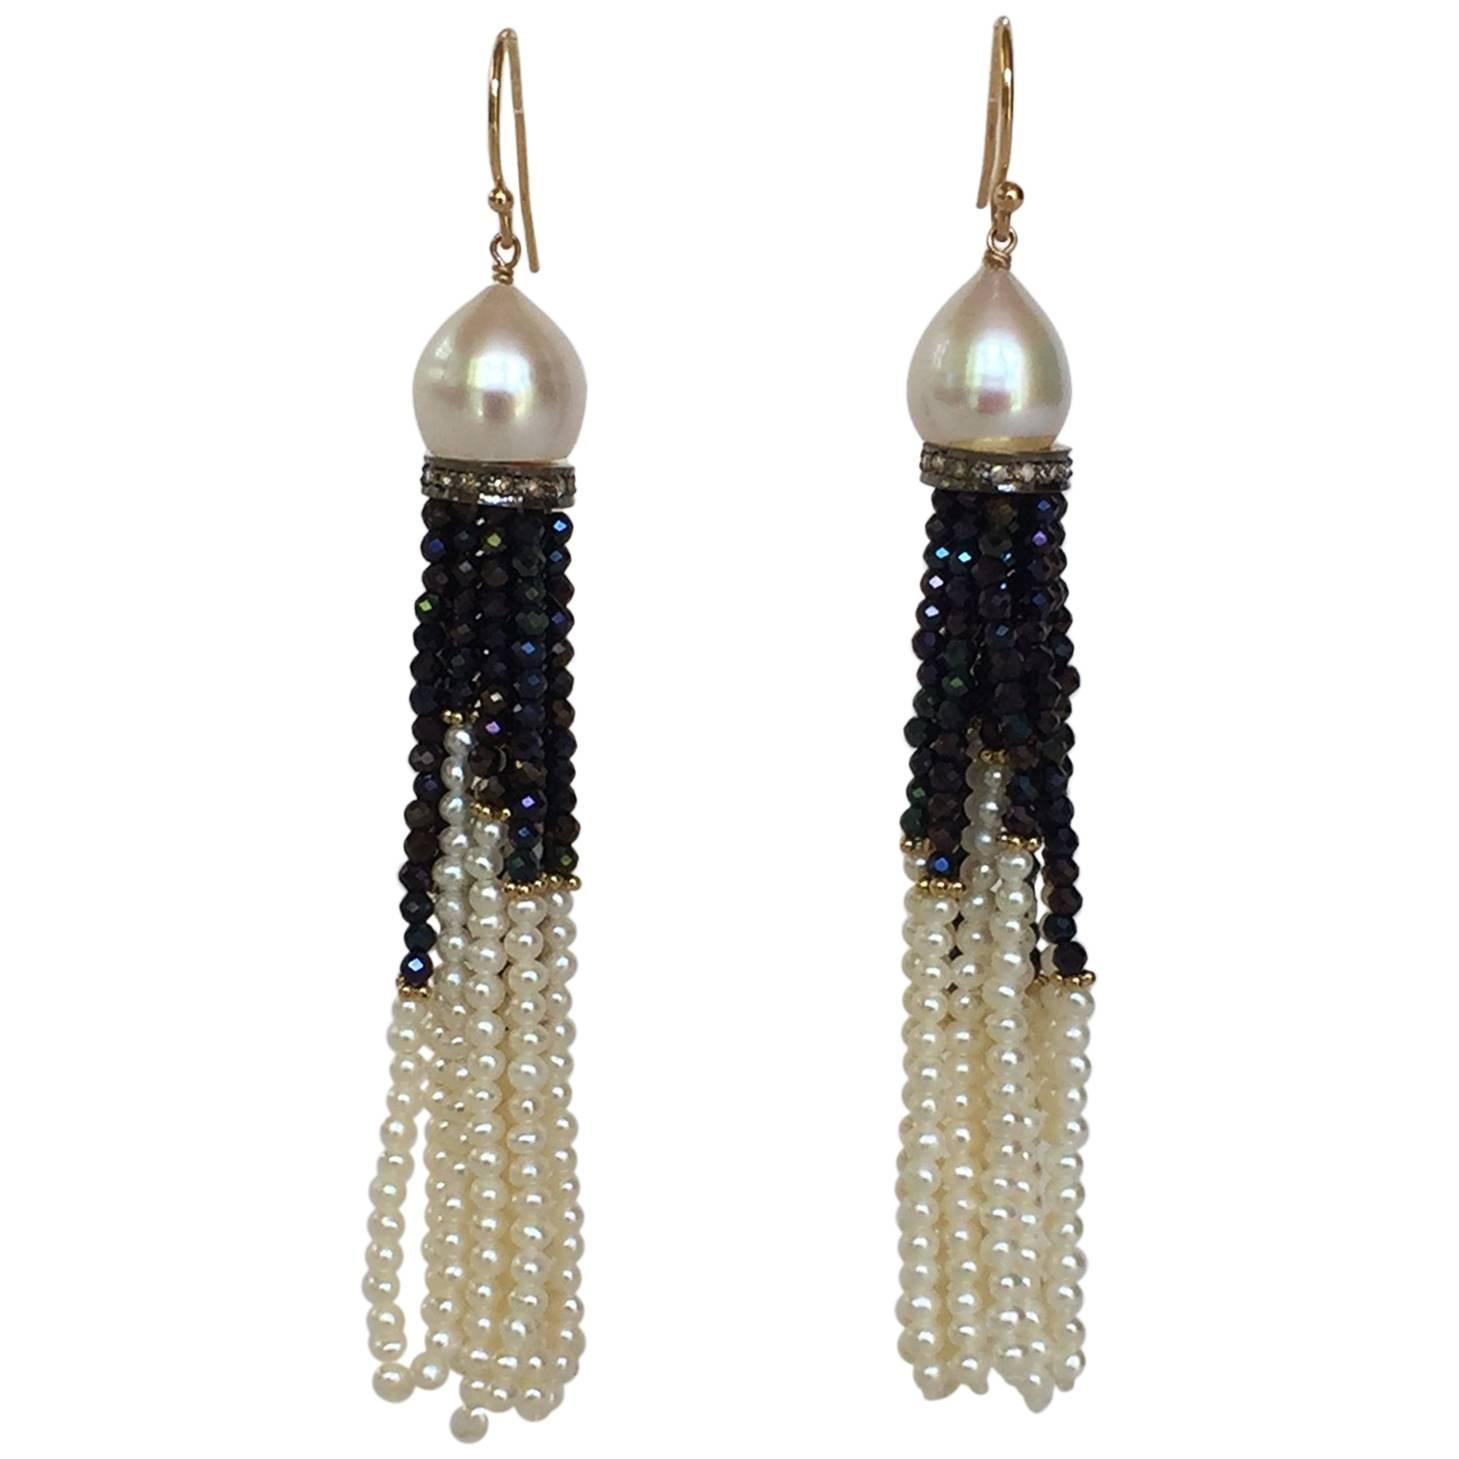 Pearl, Black Spinel and Gold Dangle Earrings by Marina J